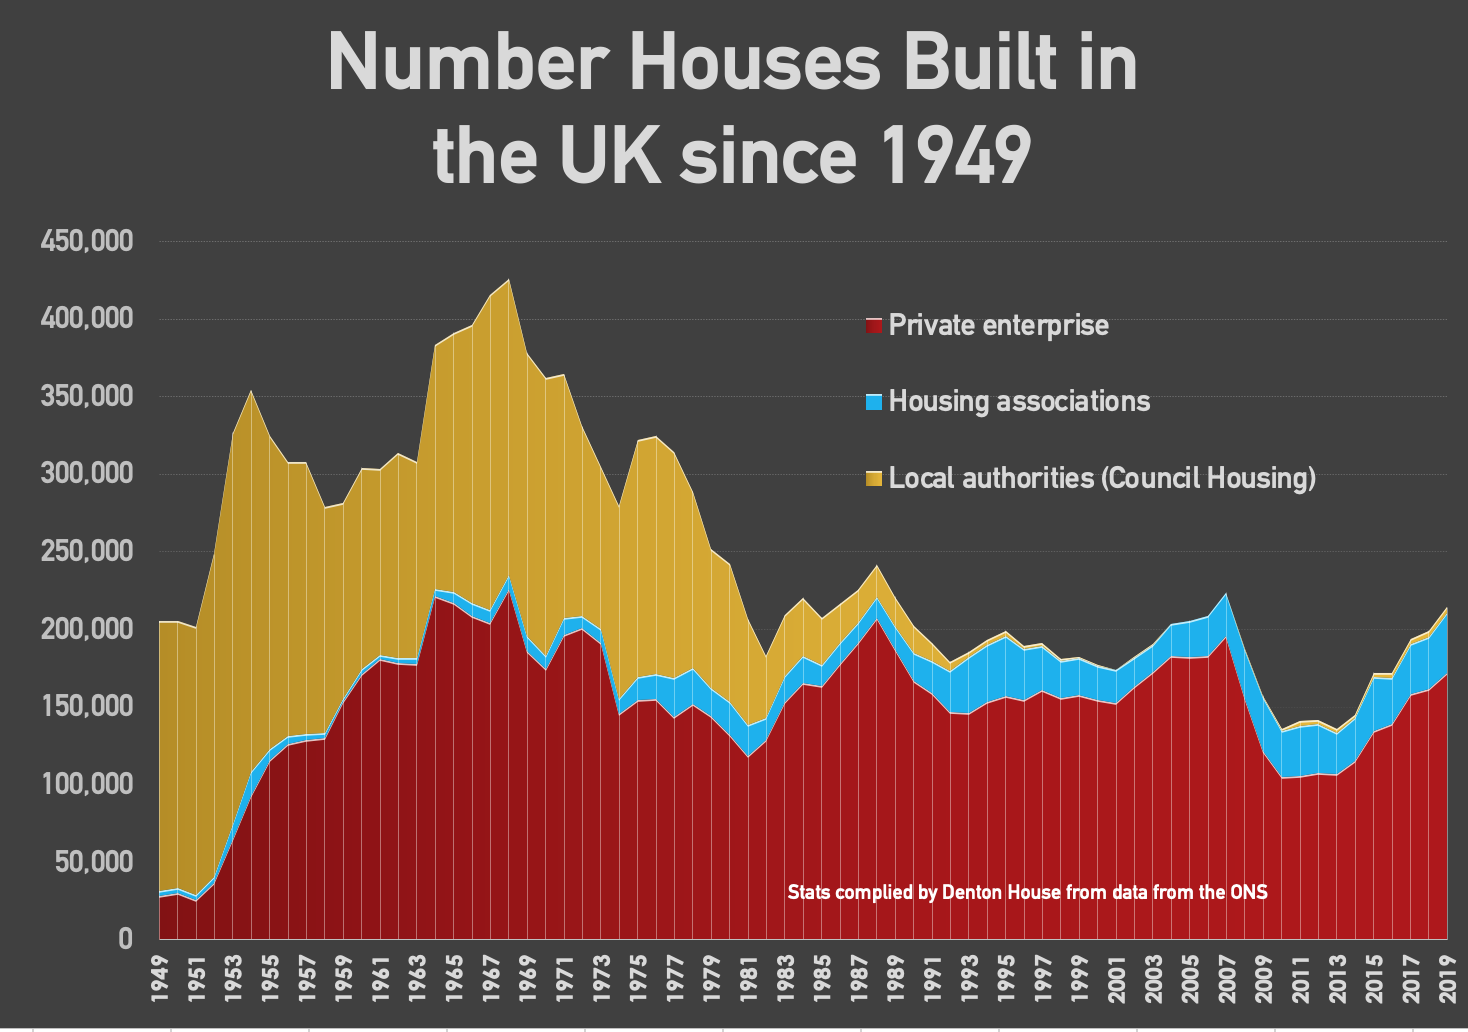 Number of Houses Built in the UK since 1949